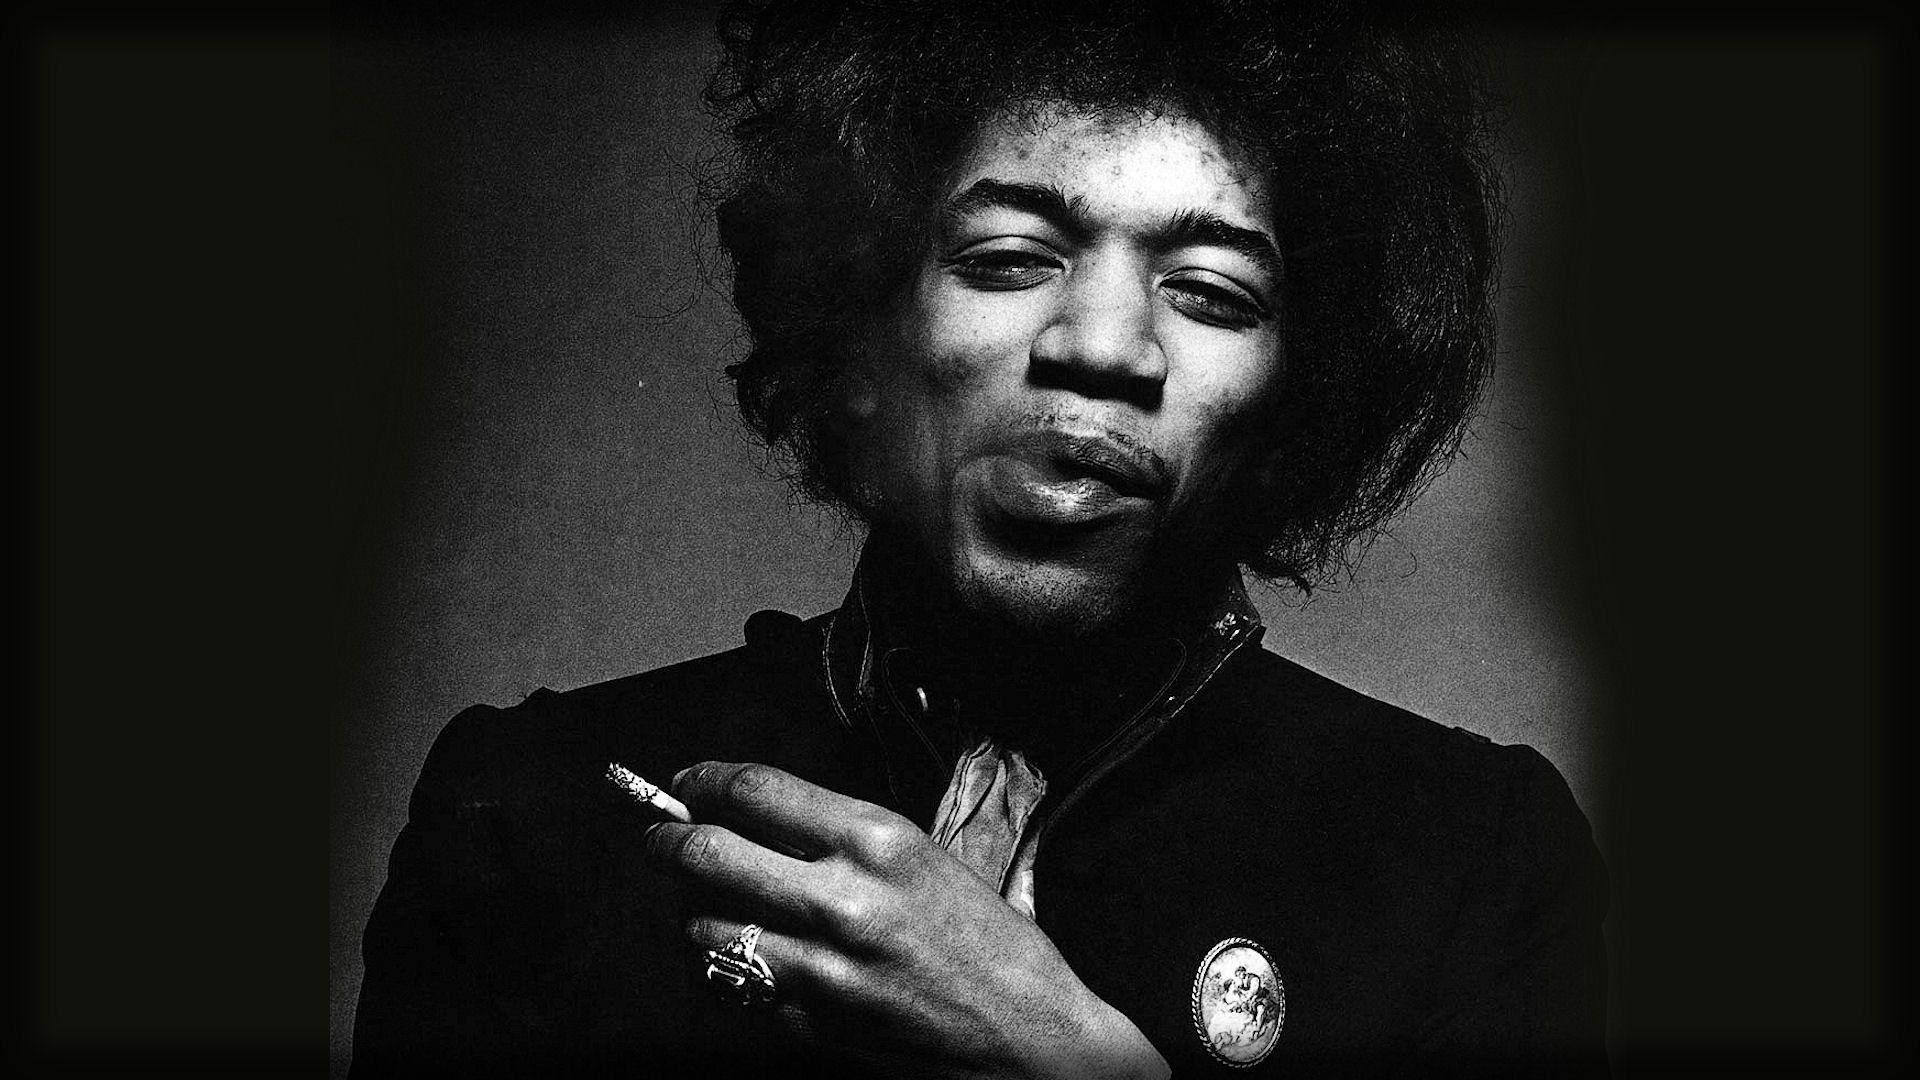 Jimi Hendrix Wallpaper High Resolution and Quality Download